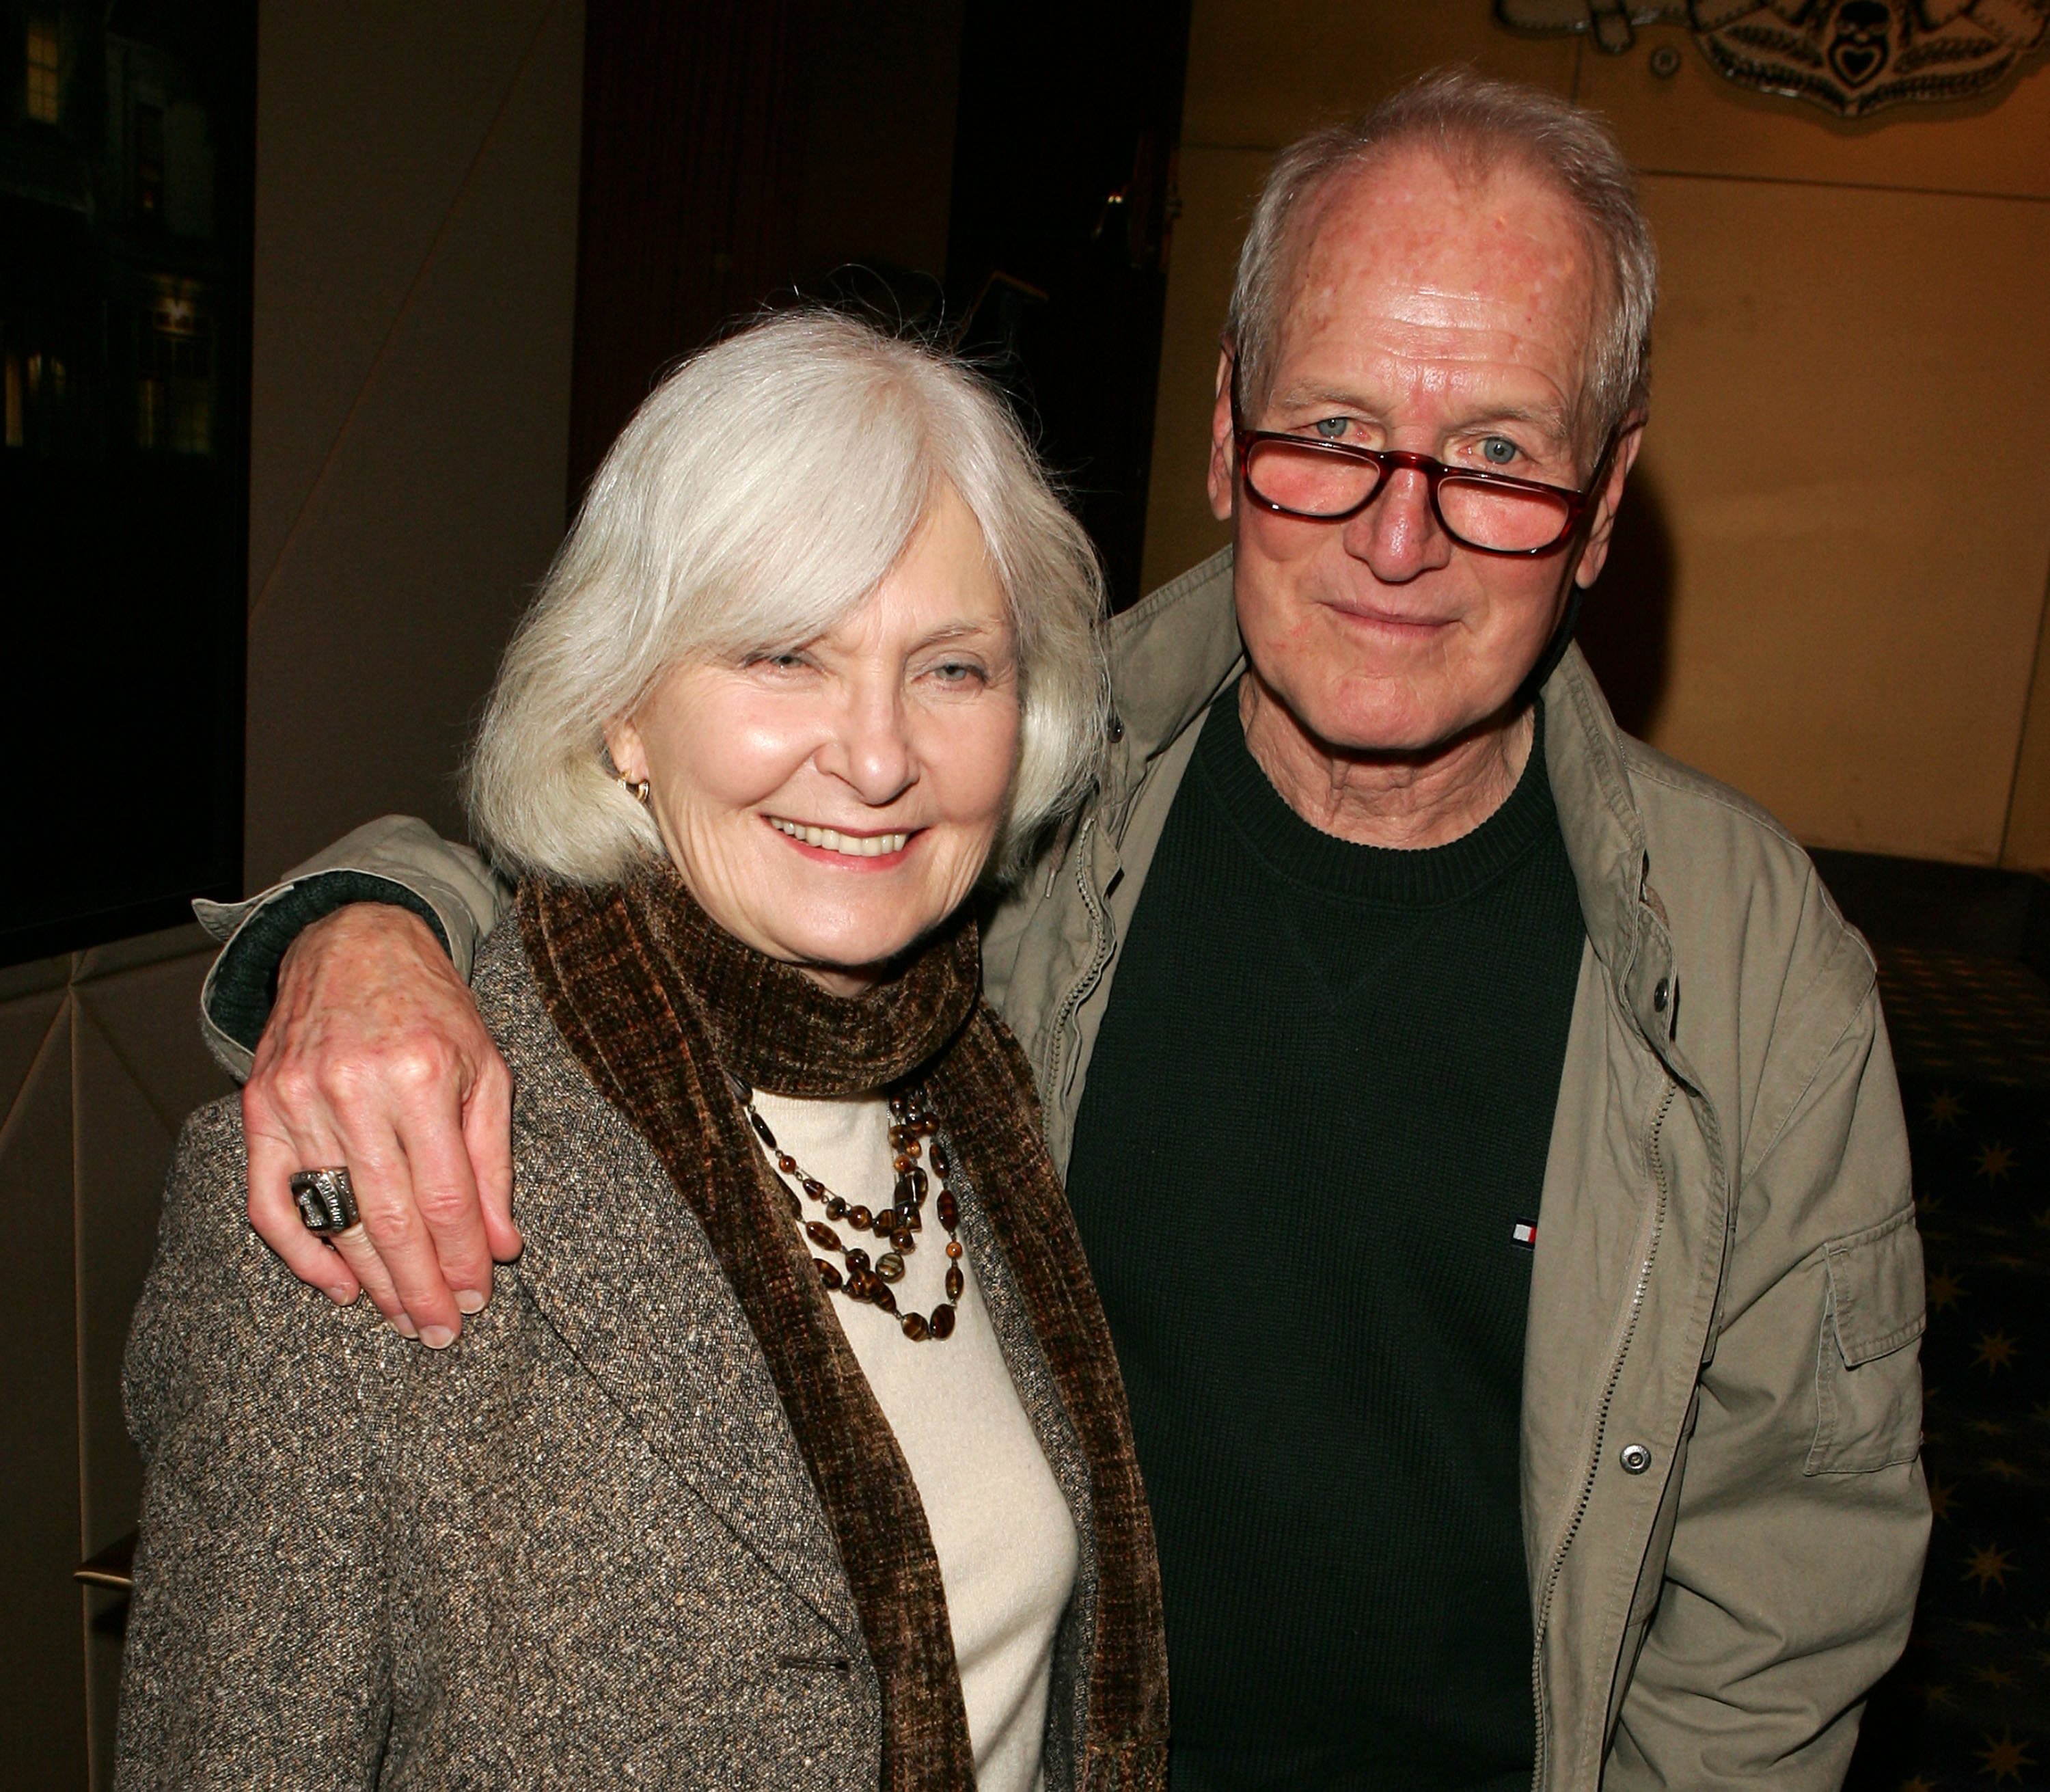 Joanne Woodward and Paul Newman attend a reception "The Woodsman" special screening in New York City on January 10, 2004. | Photo: Getty Images